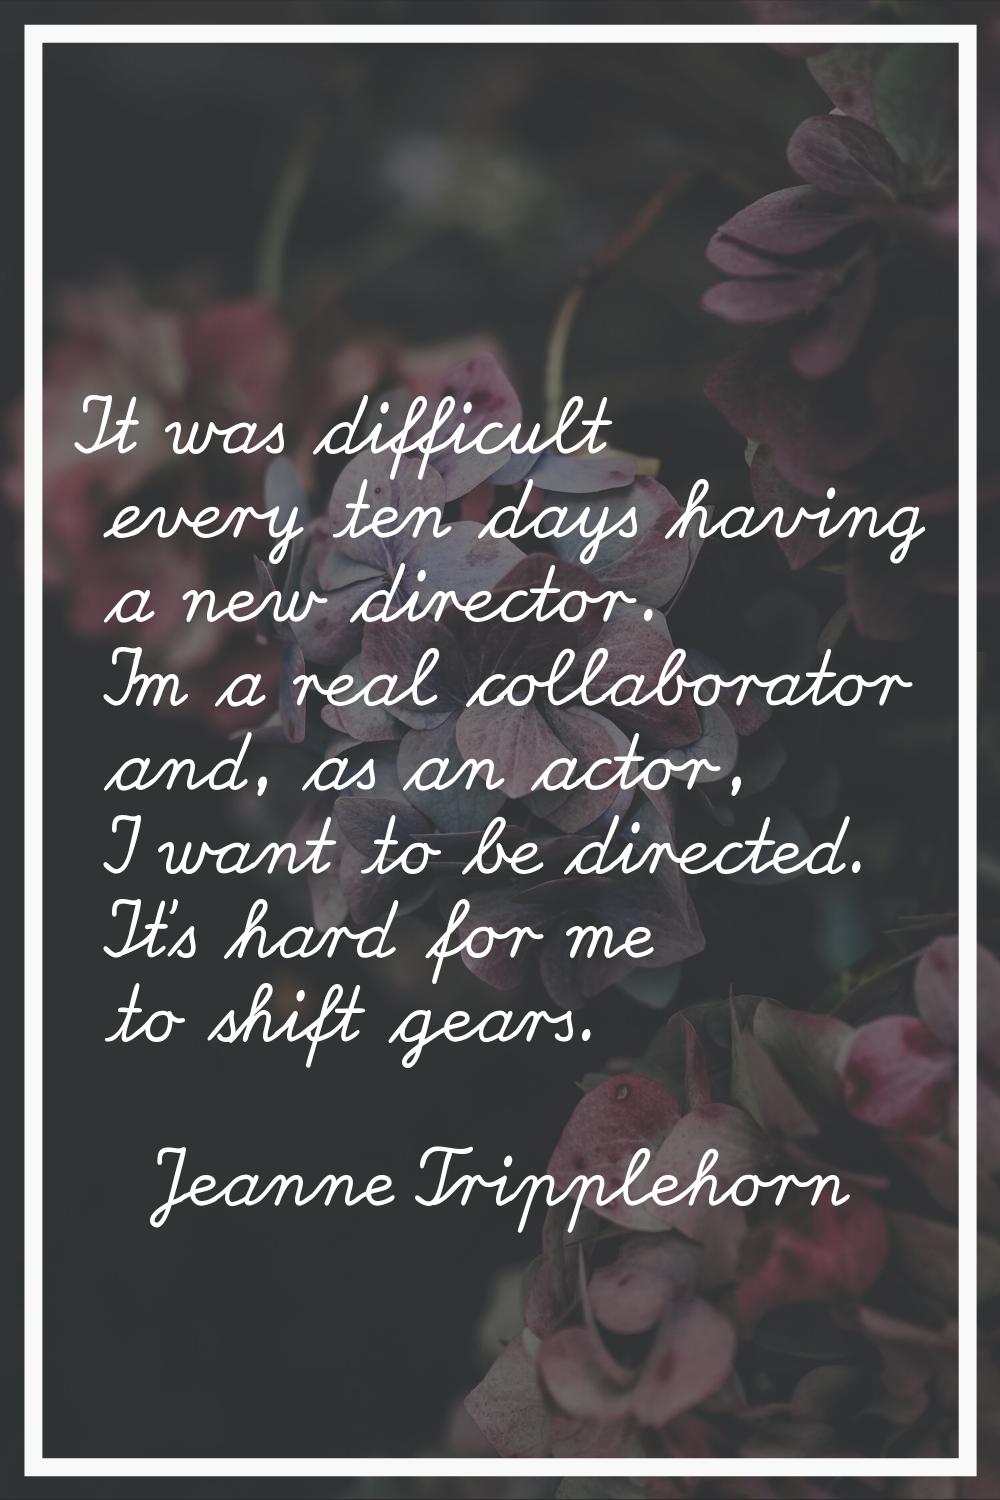 It was difficult every ten days having a new director. I'm a real collaborator and, as an actor, I 